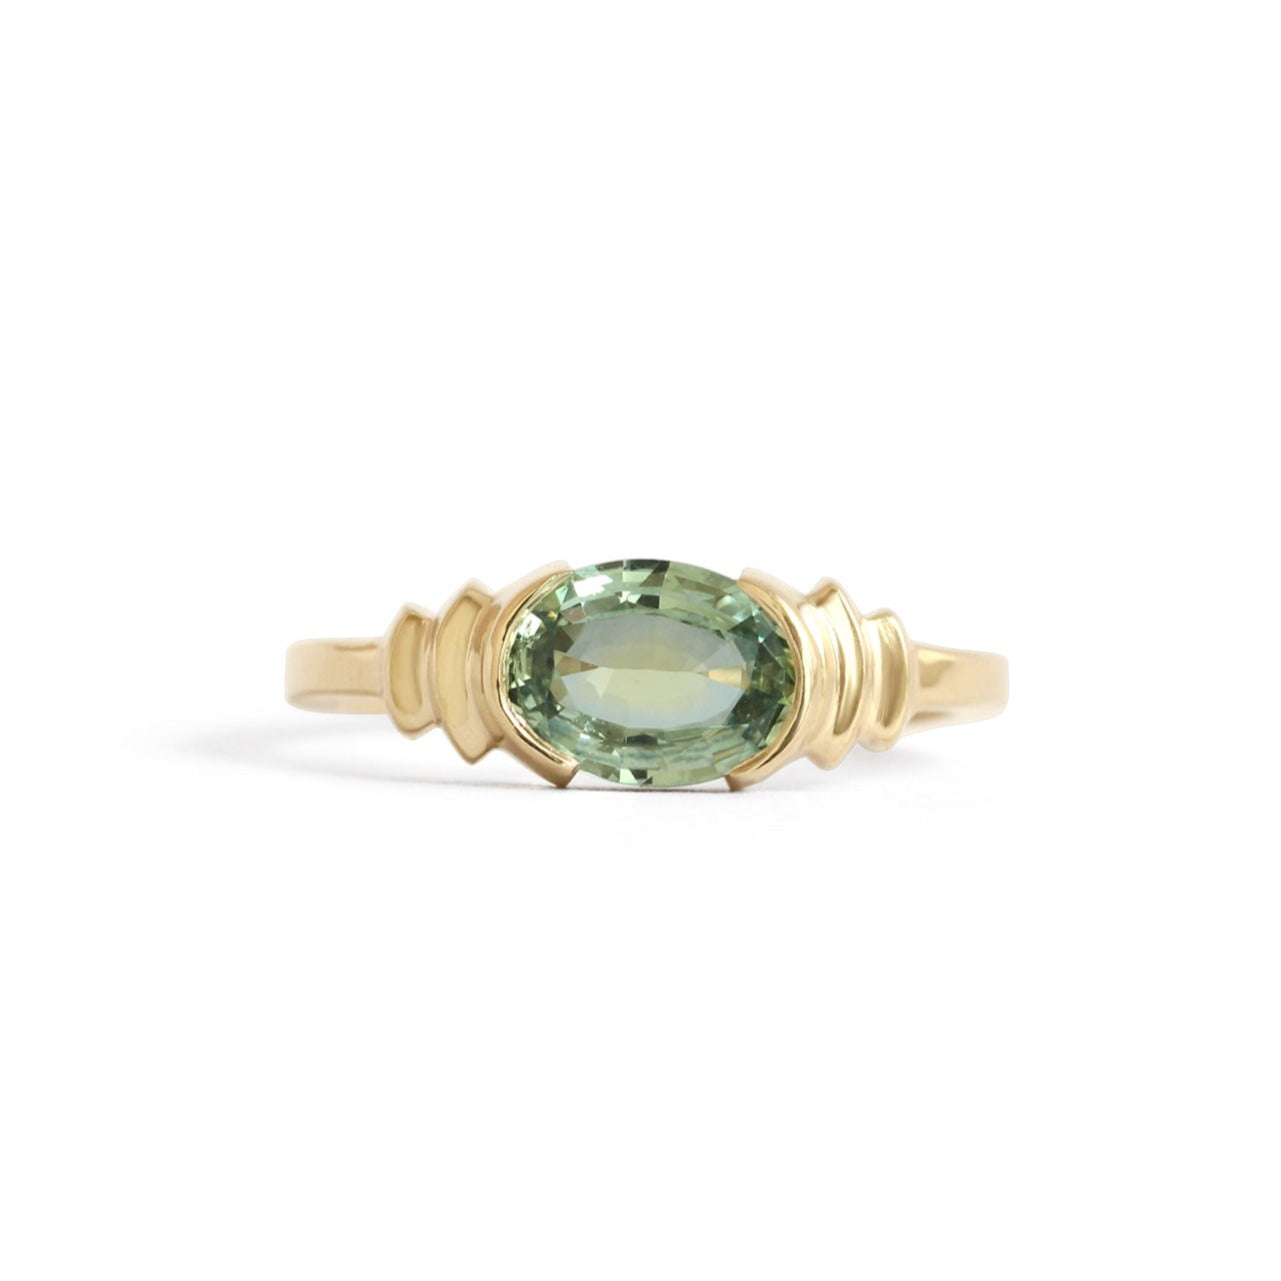 Step Ring / Oval Green Sapphire